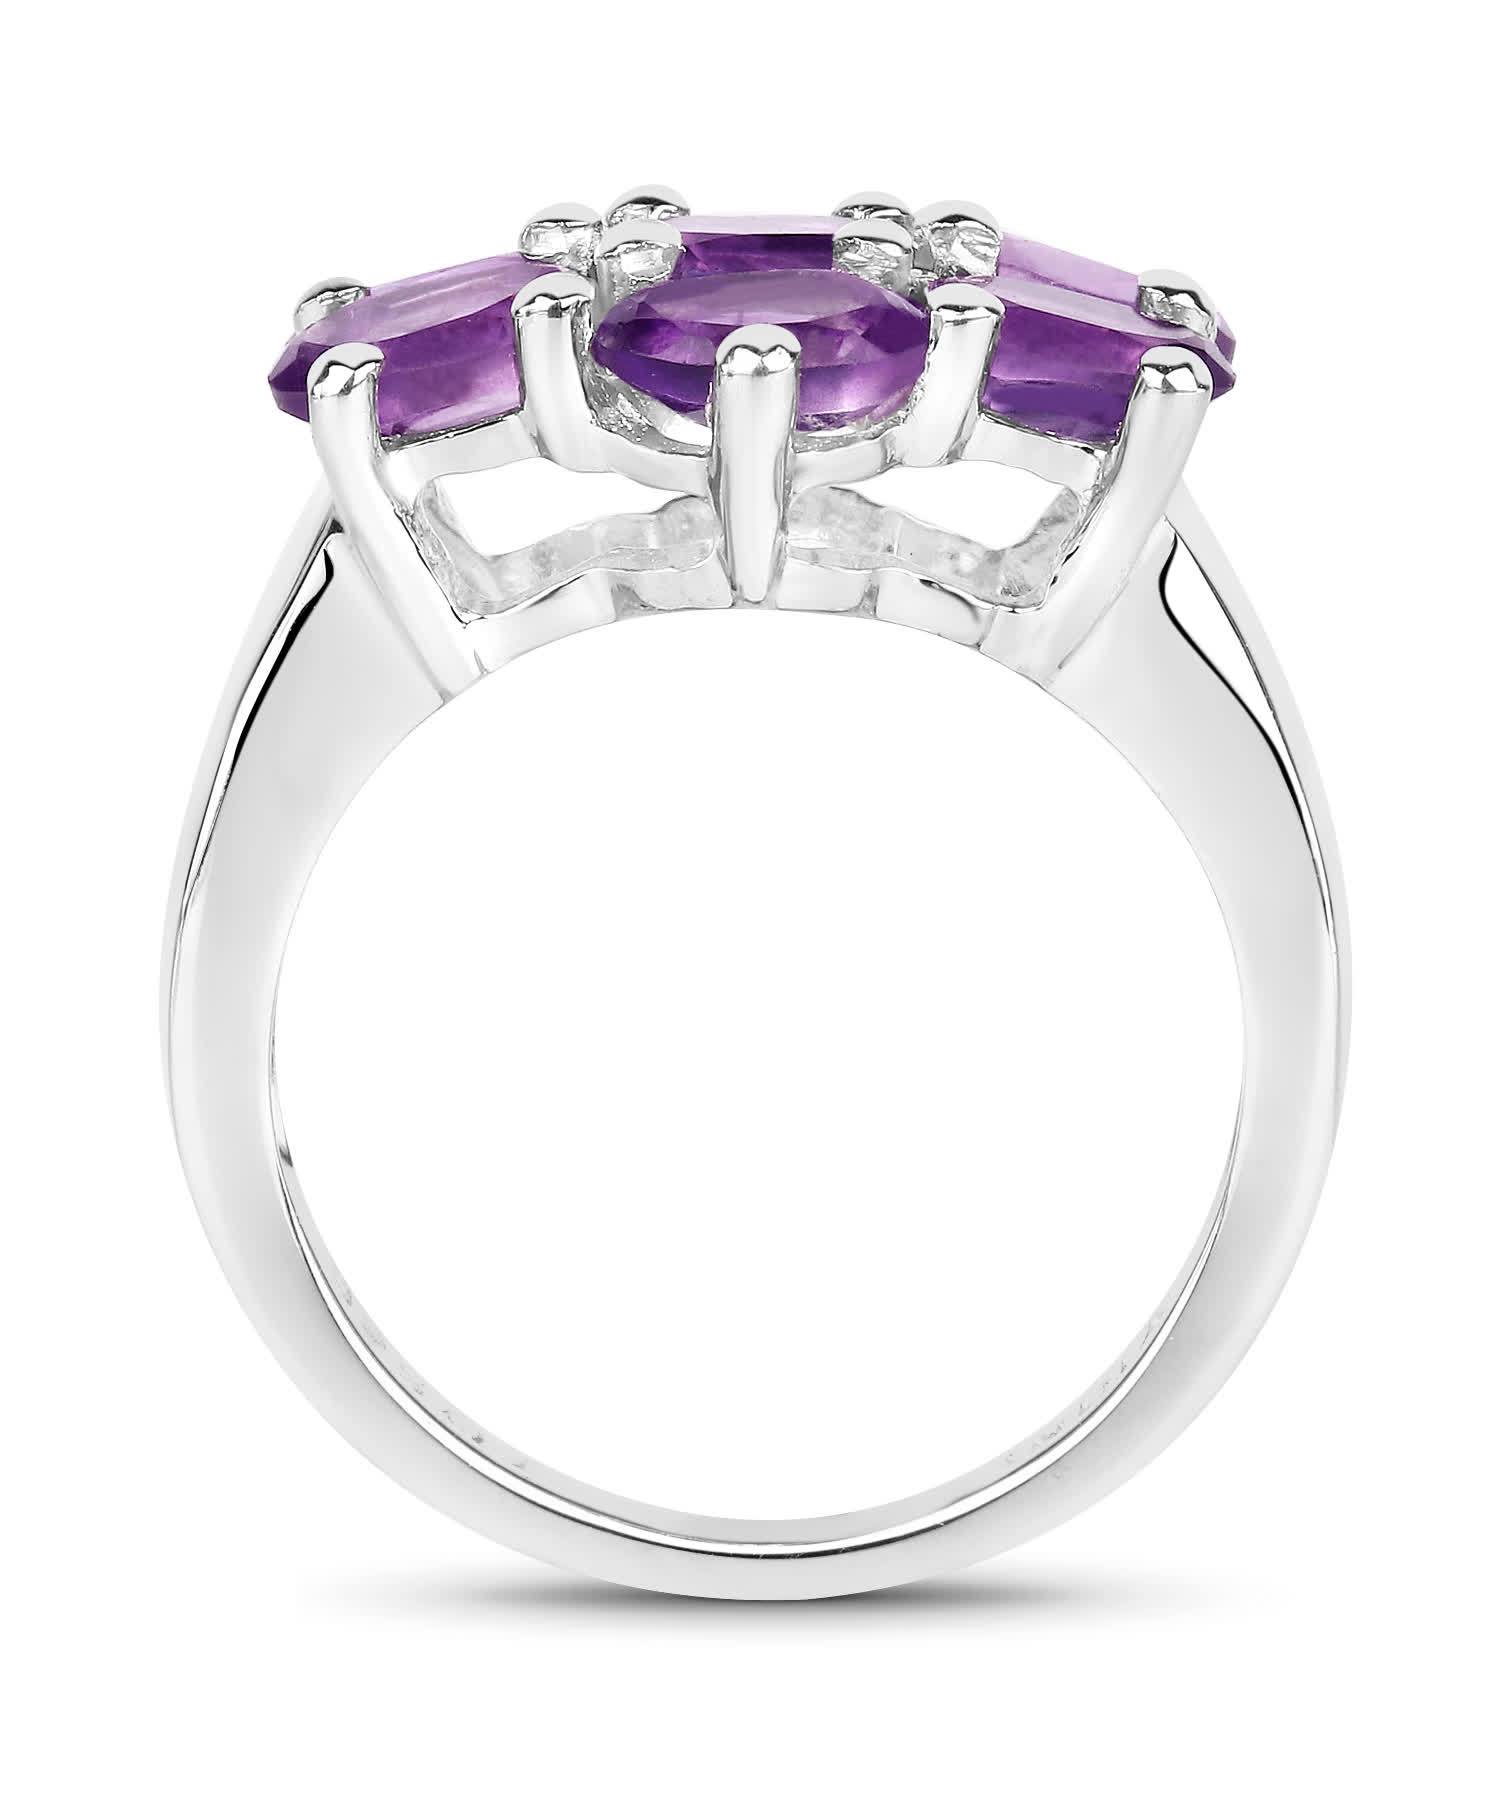 3.01ctw Natural Amethyst Rhodium Plated 925 Sterling Silver Fashion Ring View 2